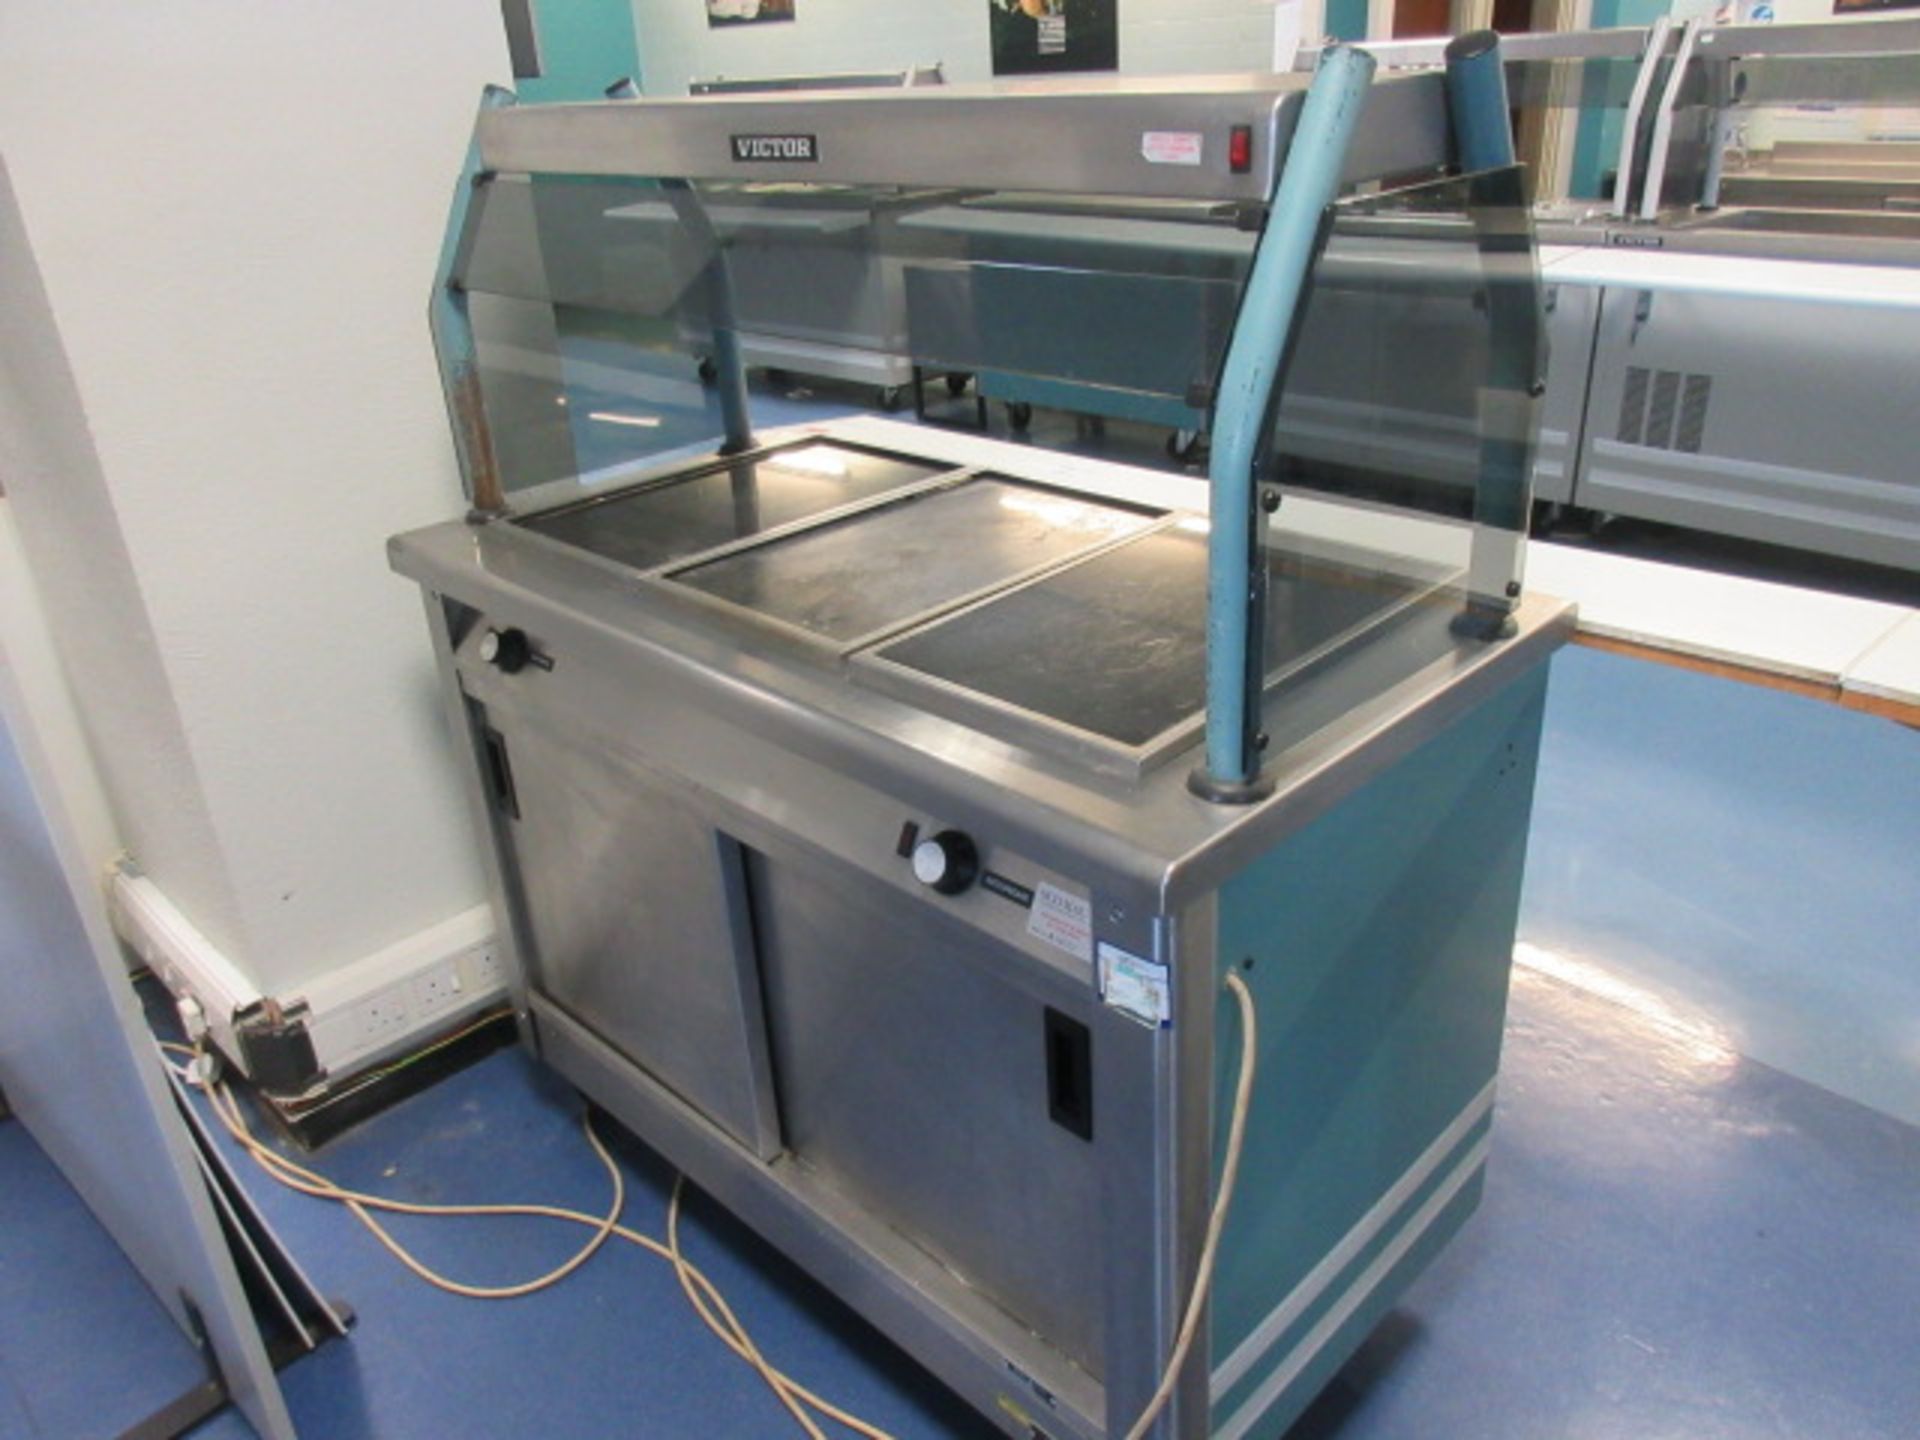 VICTOR HOT PLATE UNIT WITH TRAY SHELF